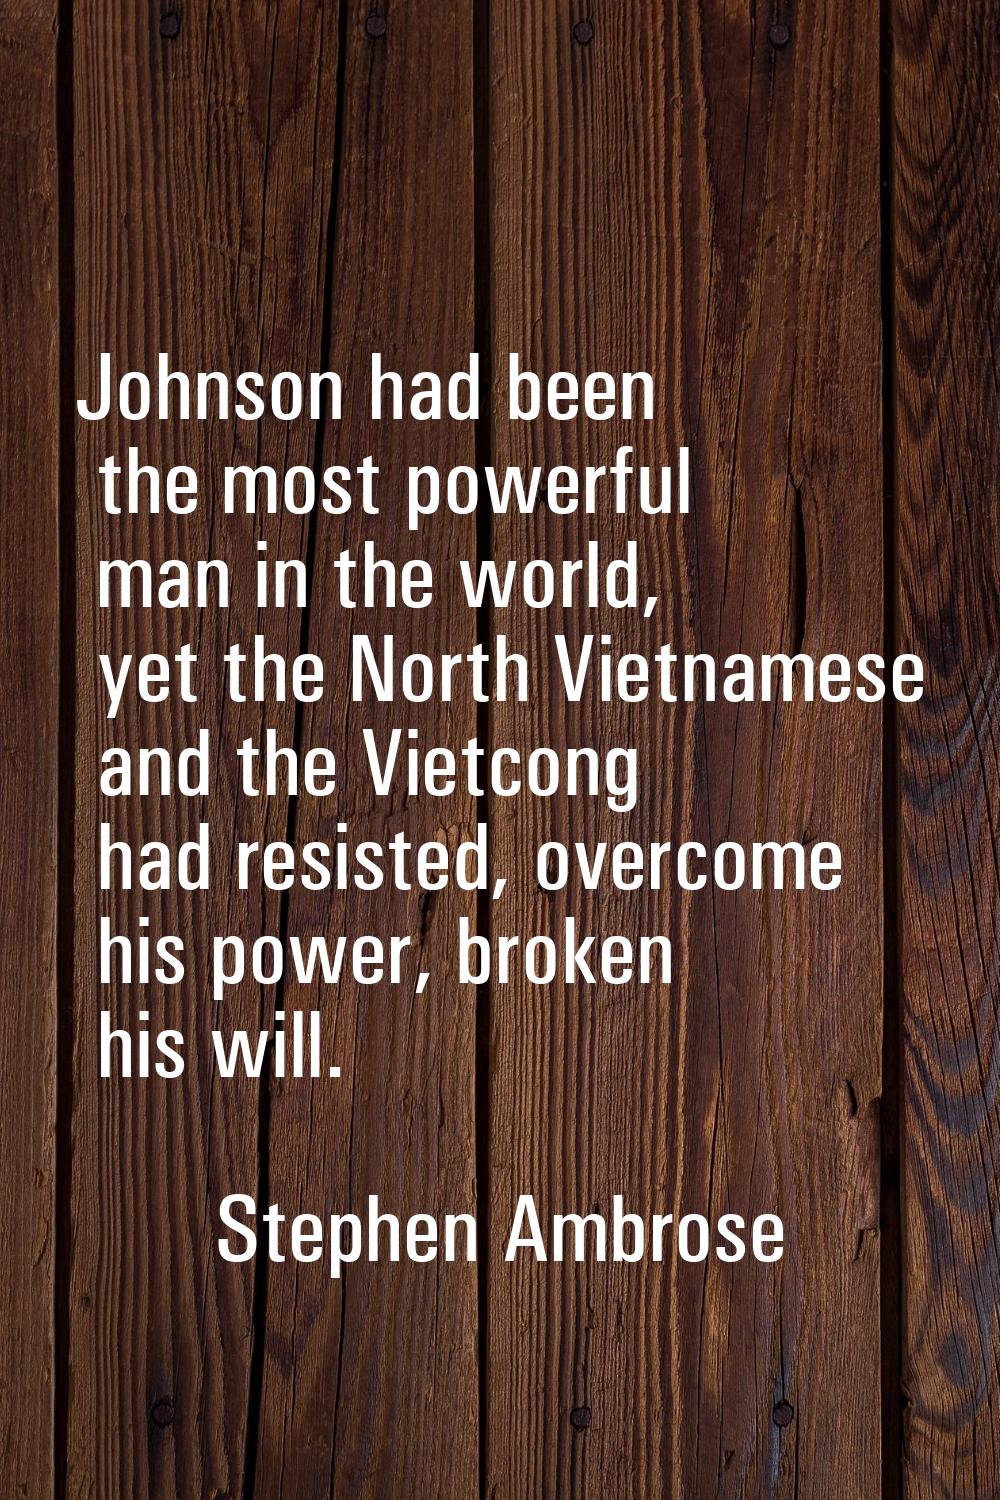 Johnson had been the most powerful man in the world, yet the North Vietnamese and the Vietcong had 